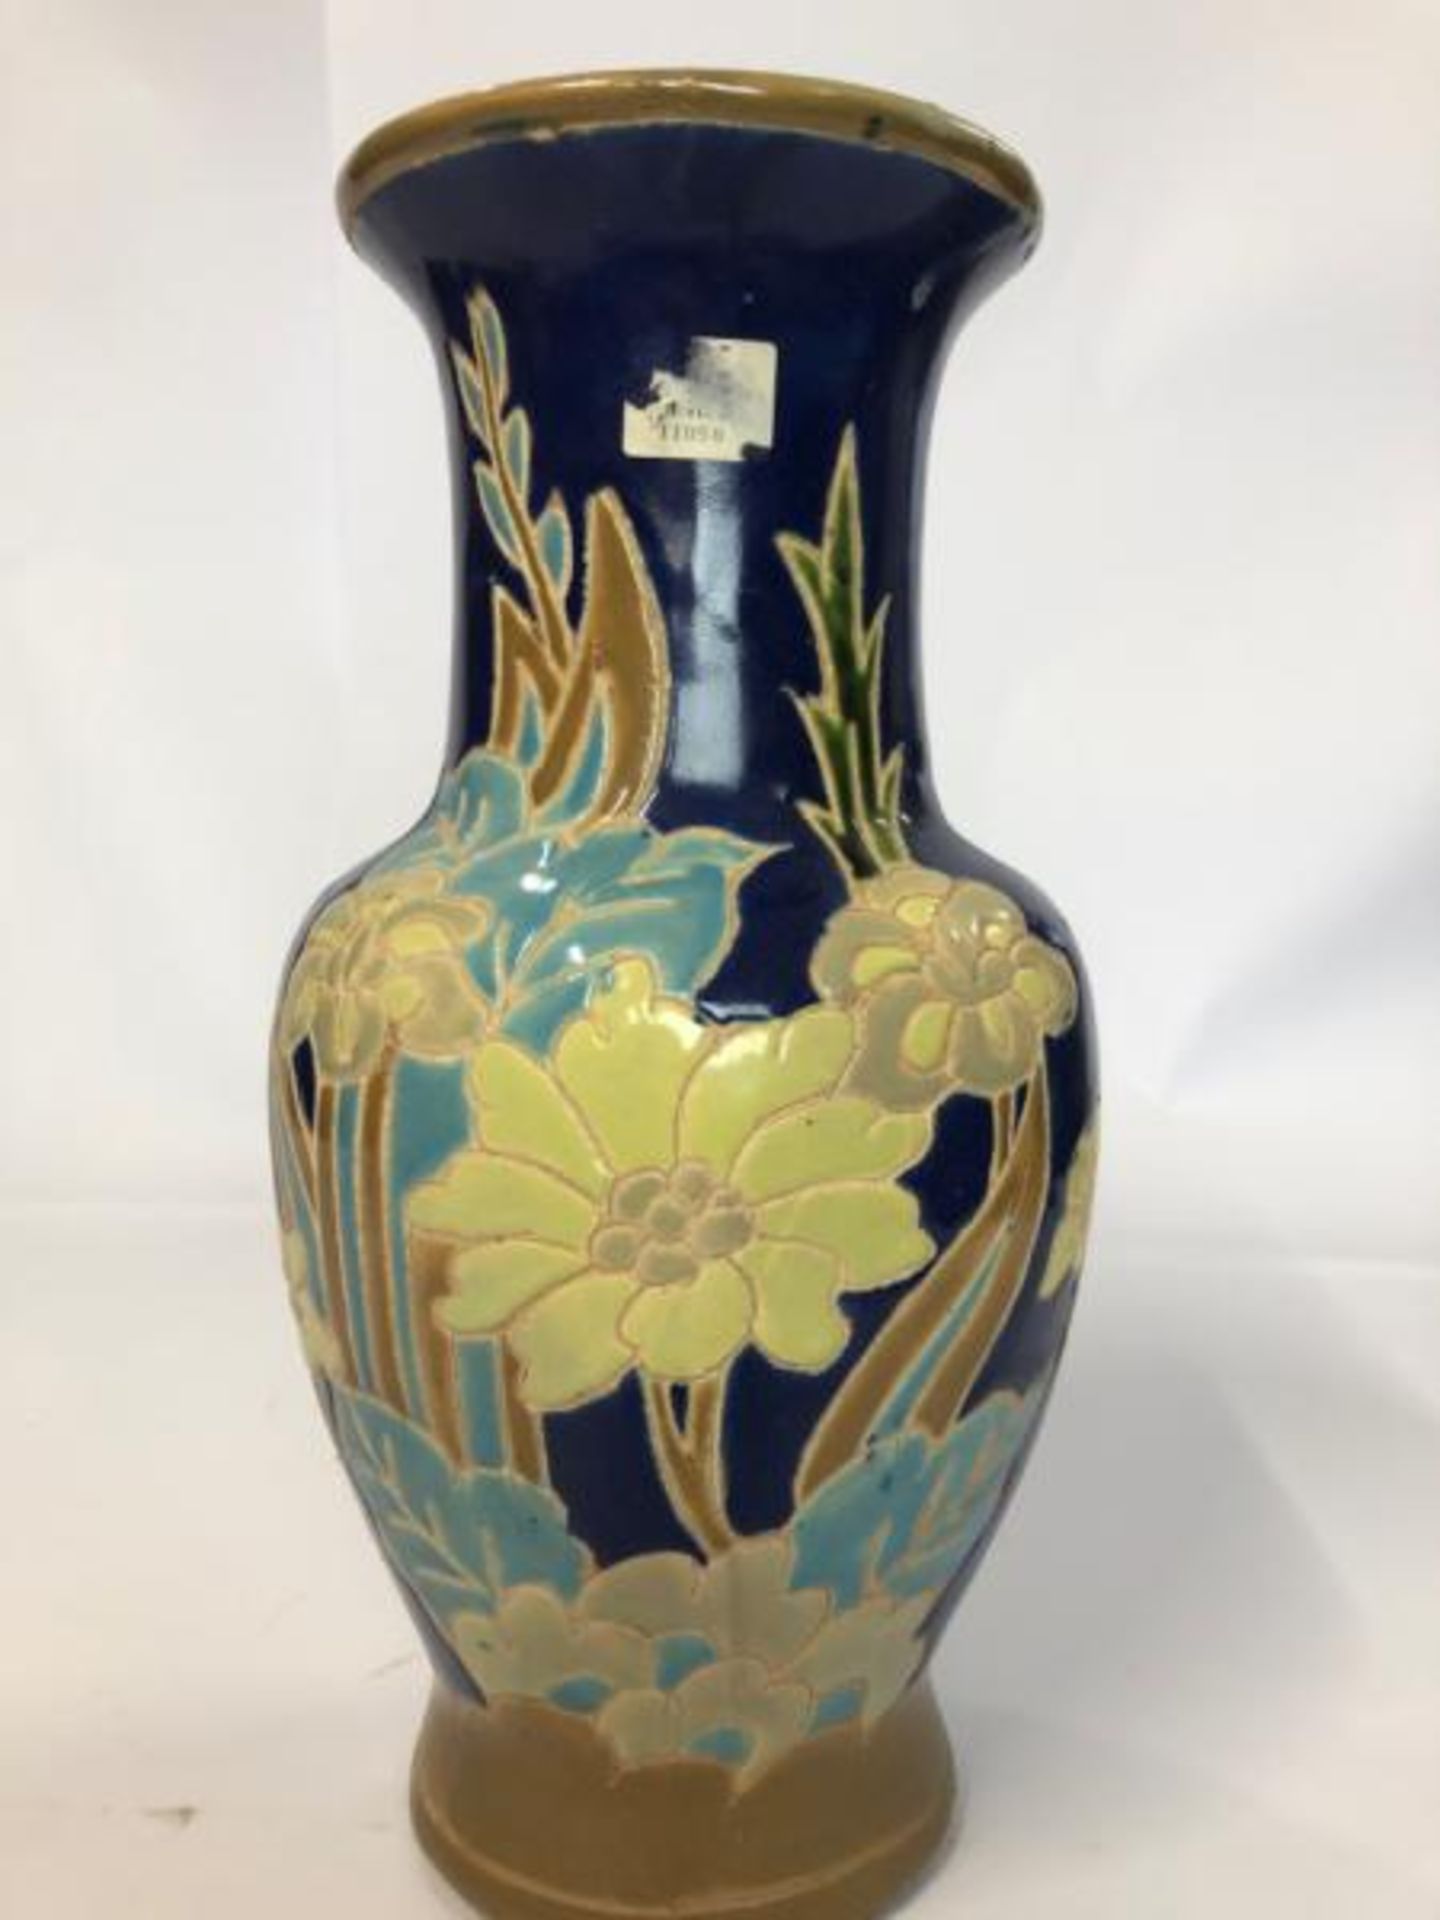 Six assorted vases including a large floor vase decorated with peacocks, 55cm high and a pair of - Image 9 of 14